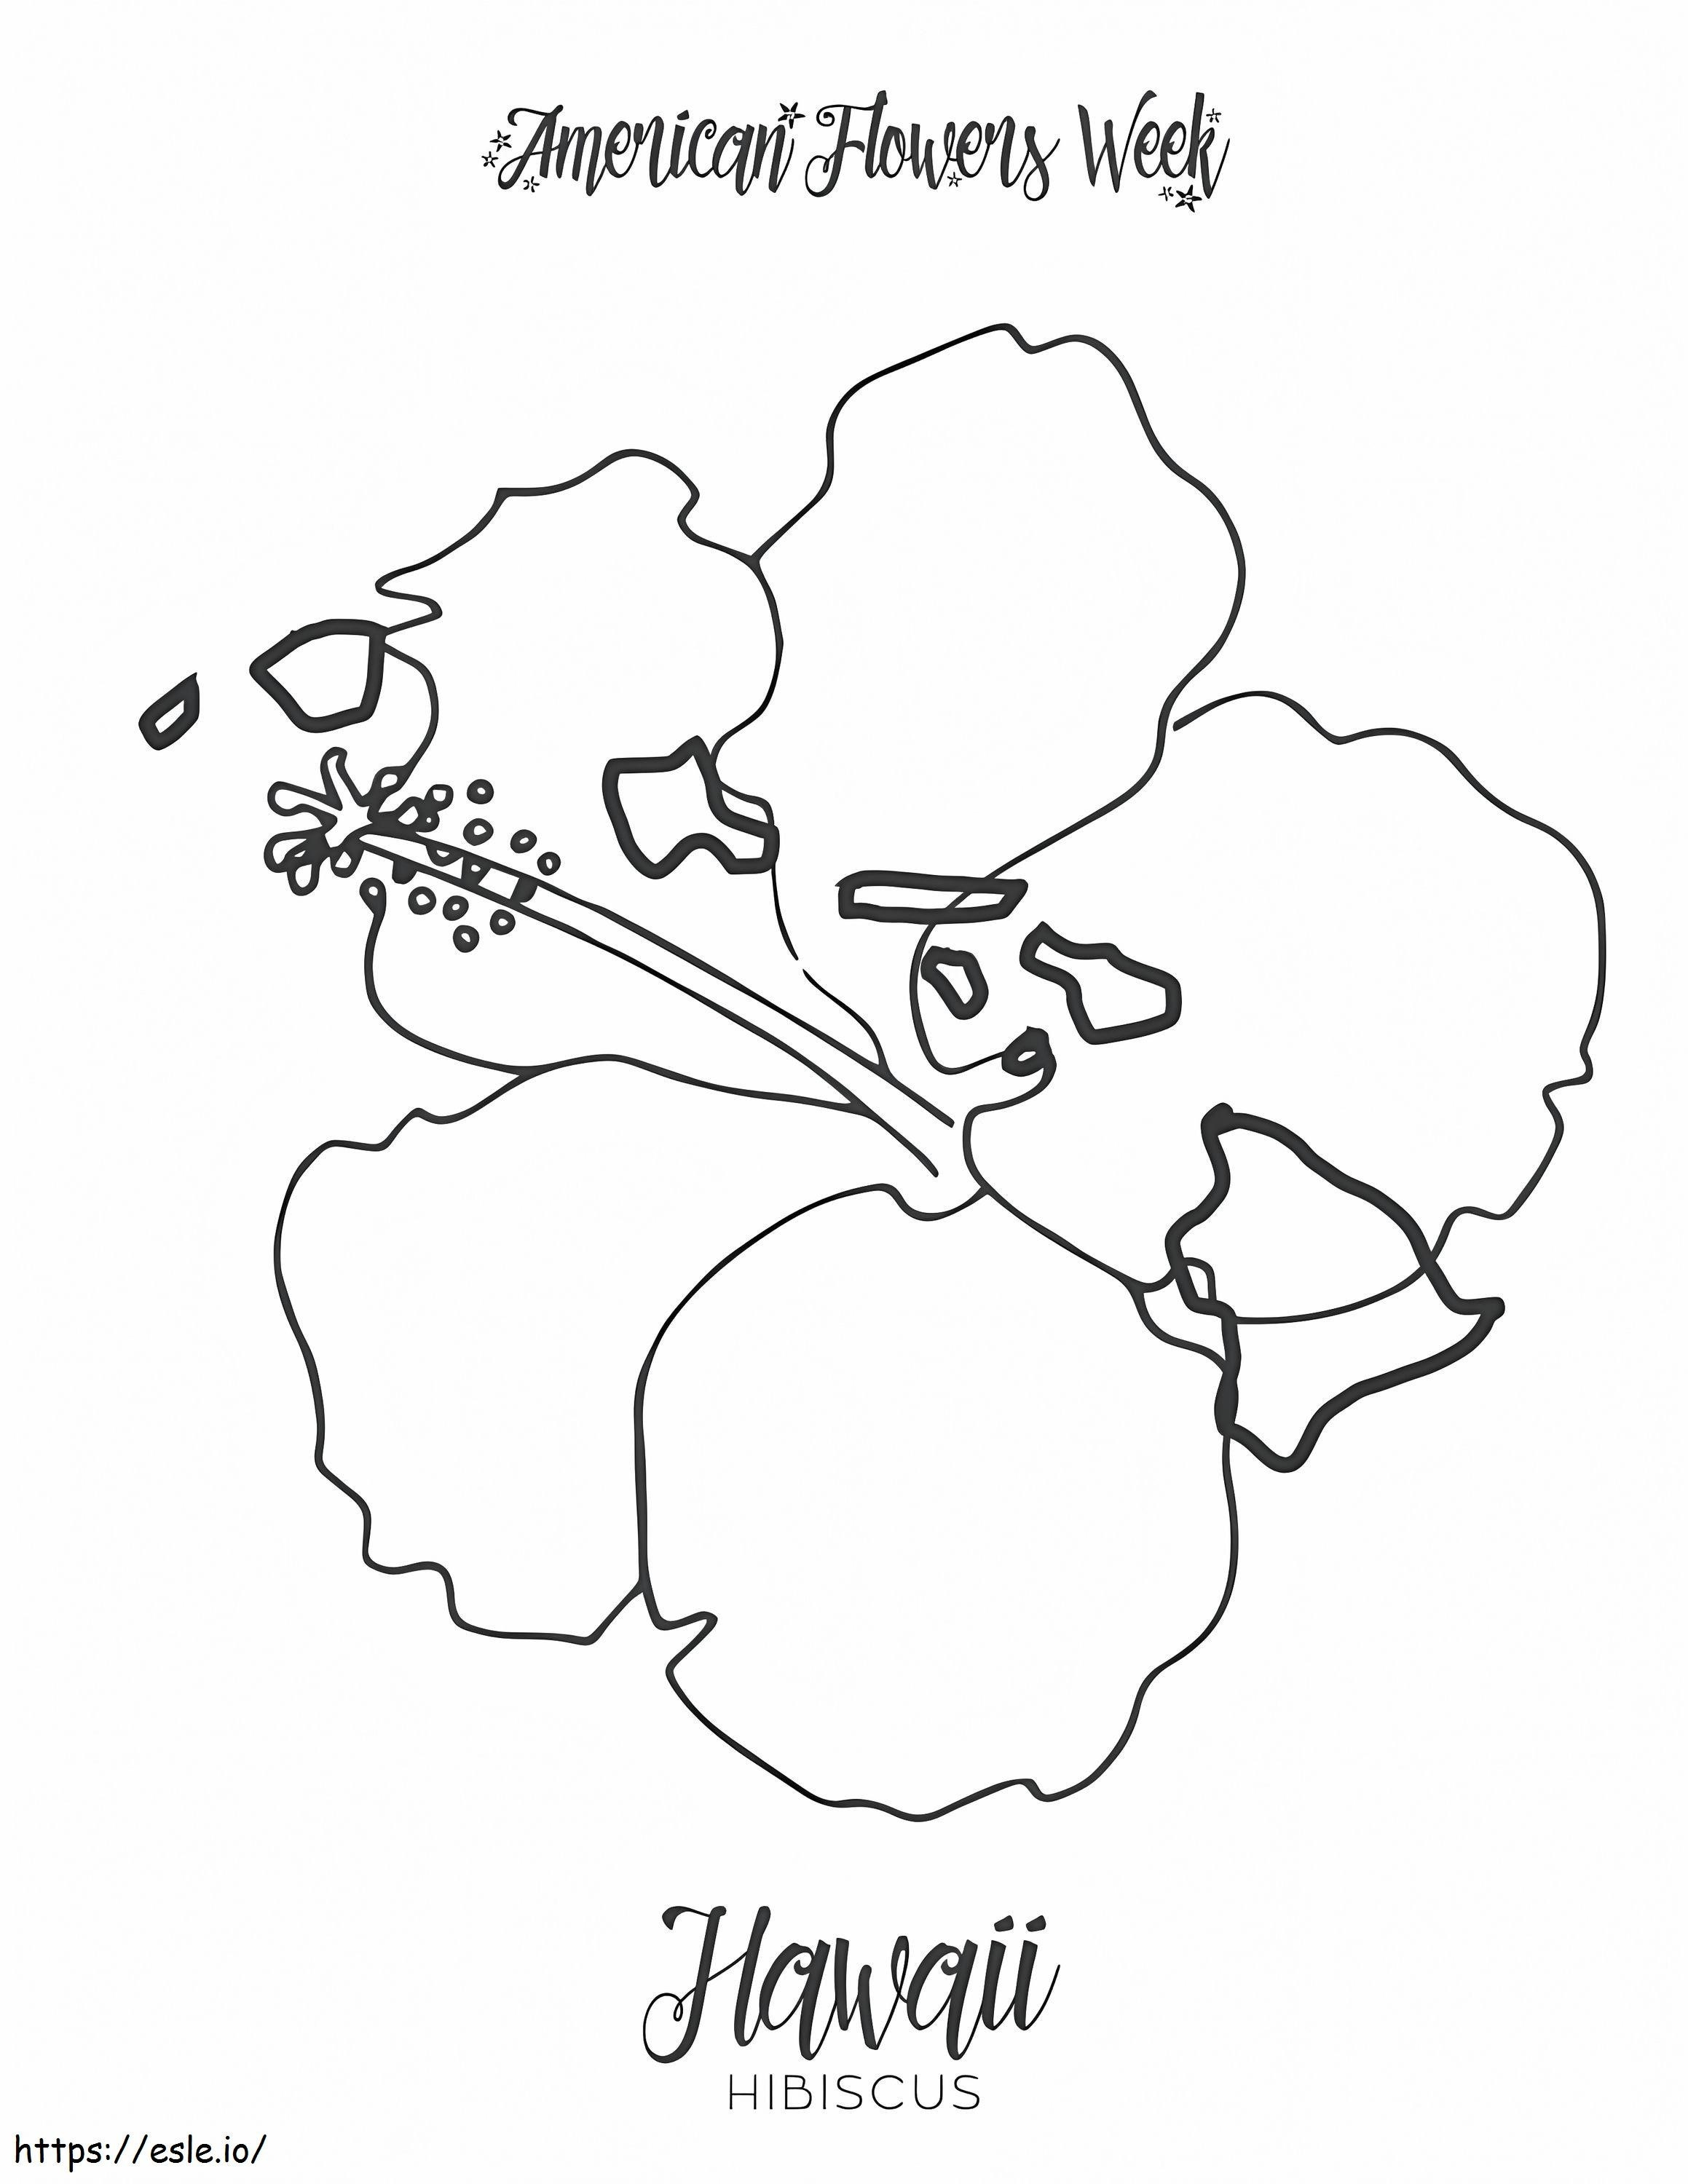 Hawaii Hibiscusstate Flower coloring page